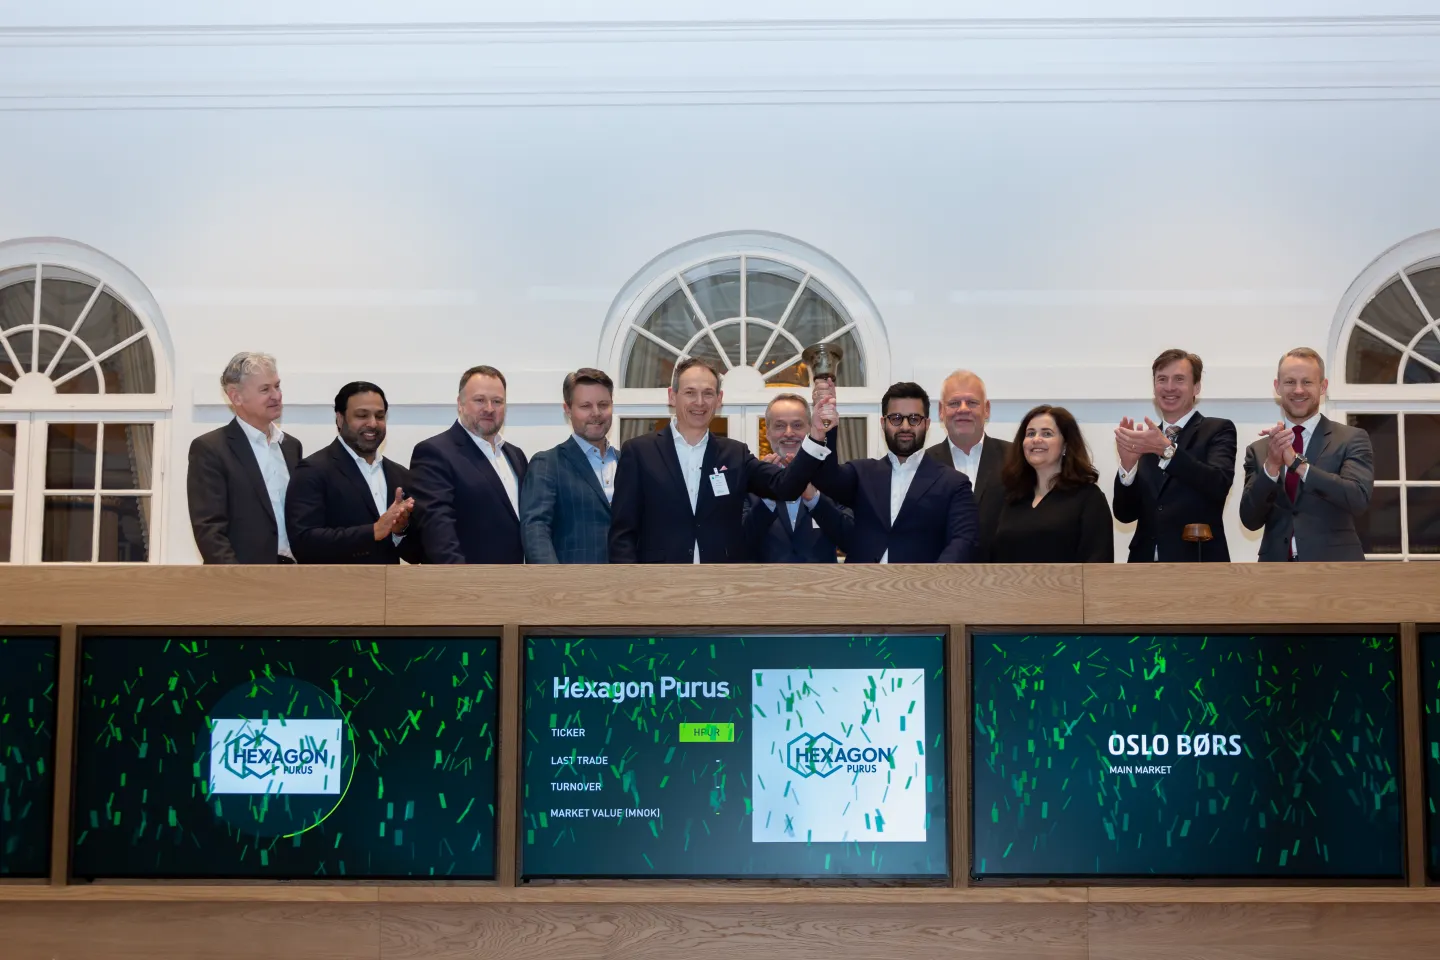 Morten Holum, CEO of Hexagon Purus, and Salman Alam, CFO, rang the bell this morning to celebrate the company’s transfer to the Oslo Børs main market. They were welcomed by Øivind Amundsen, CEO of Oslo Børs (Photo: Chris Fey/ NTB).